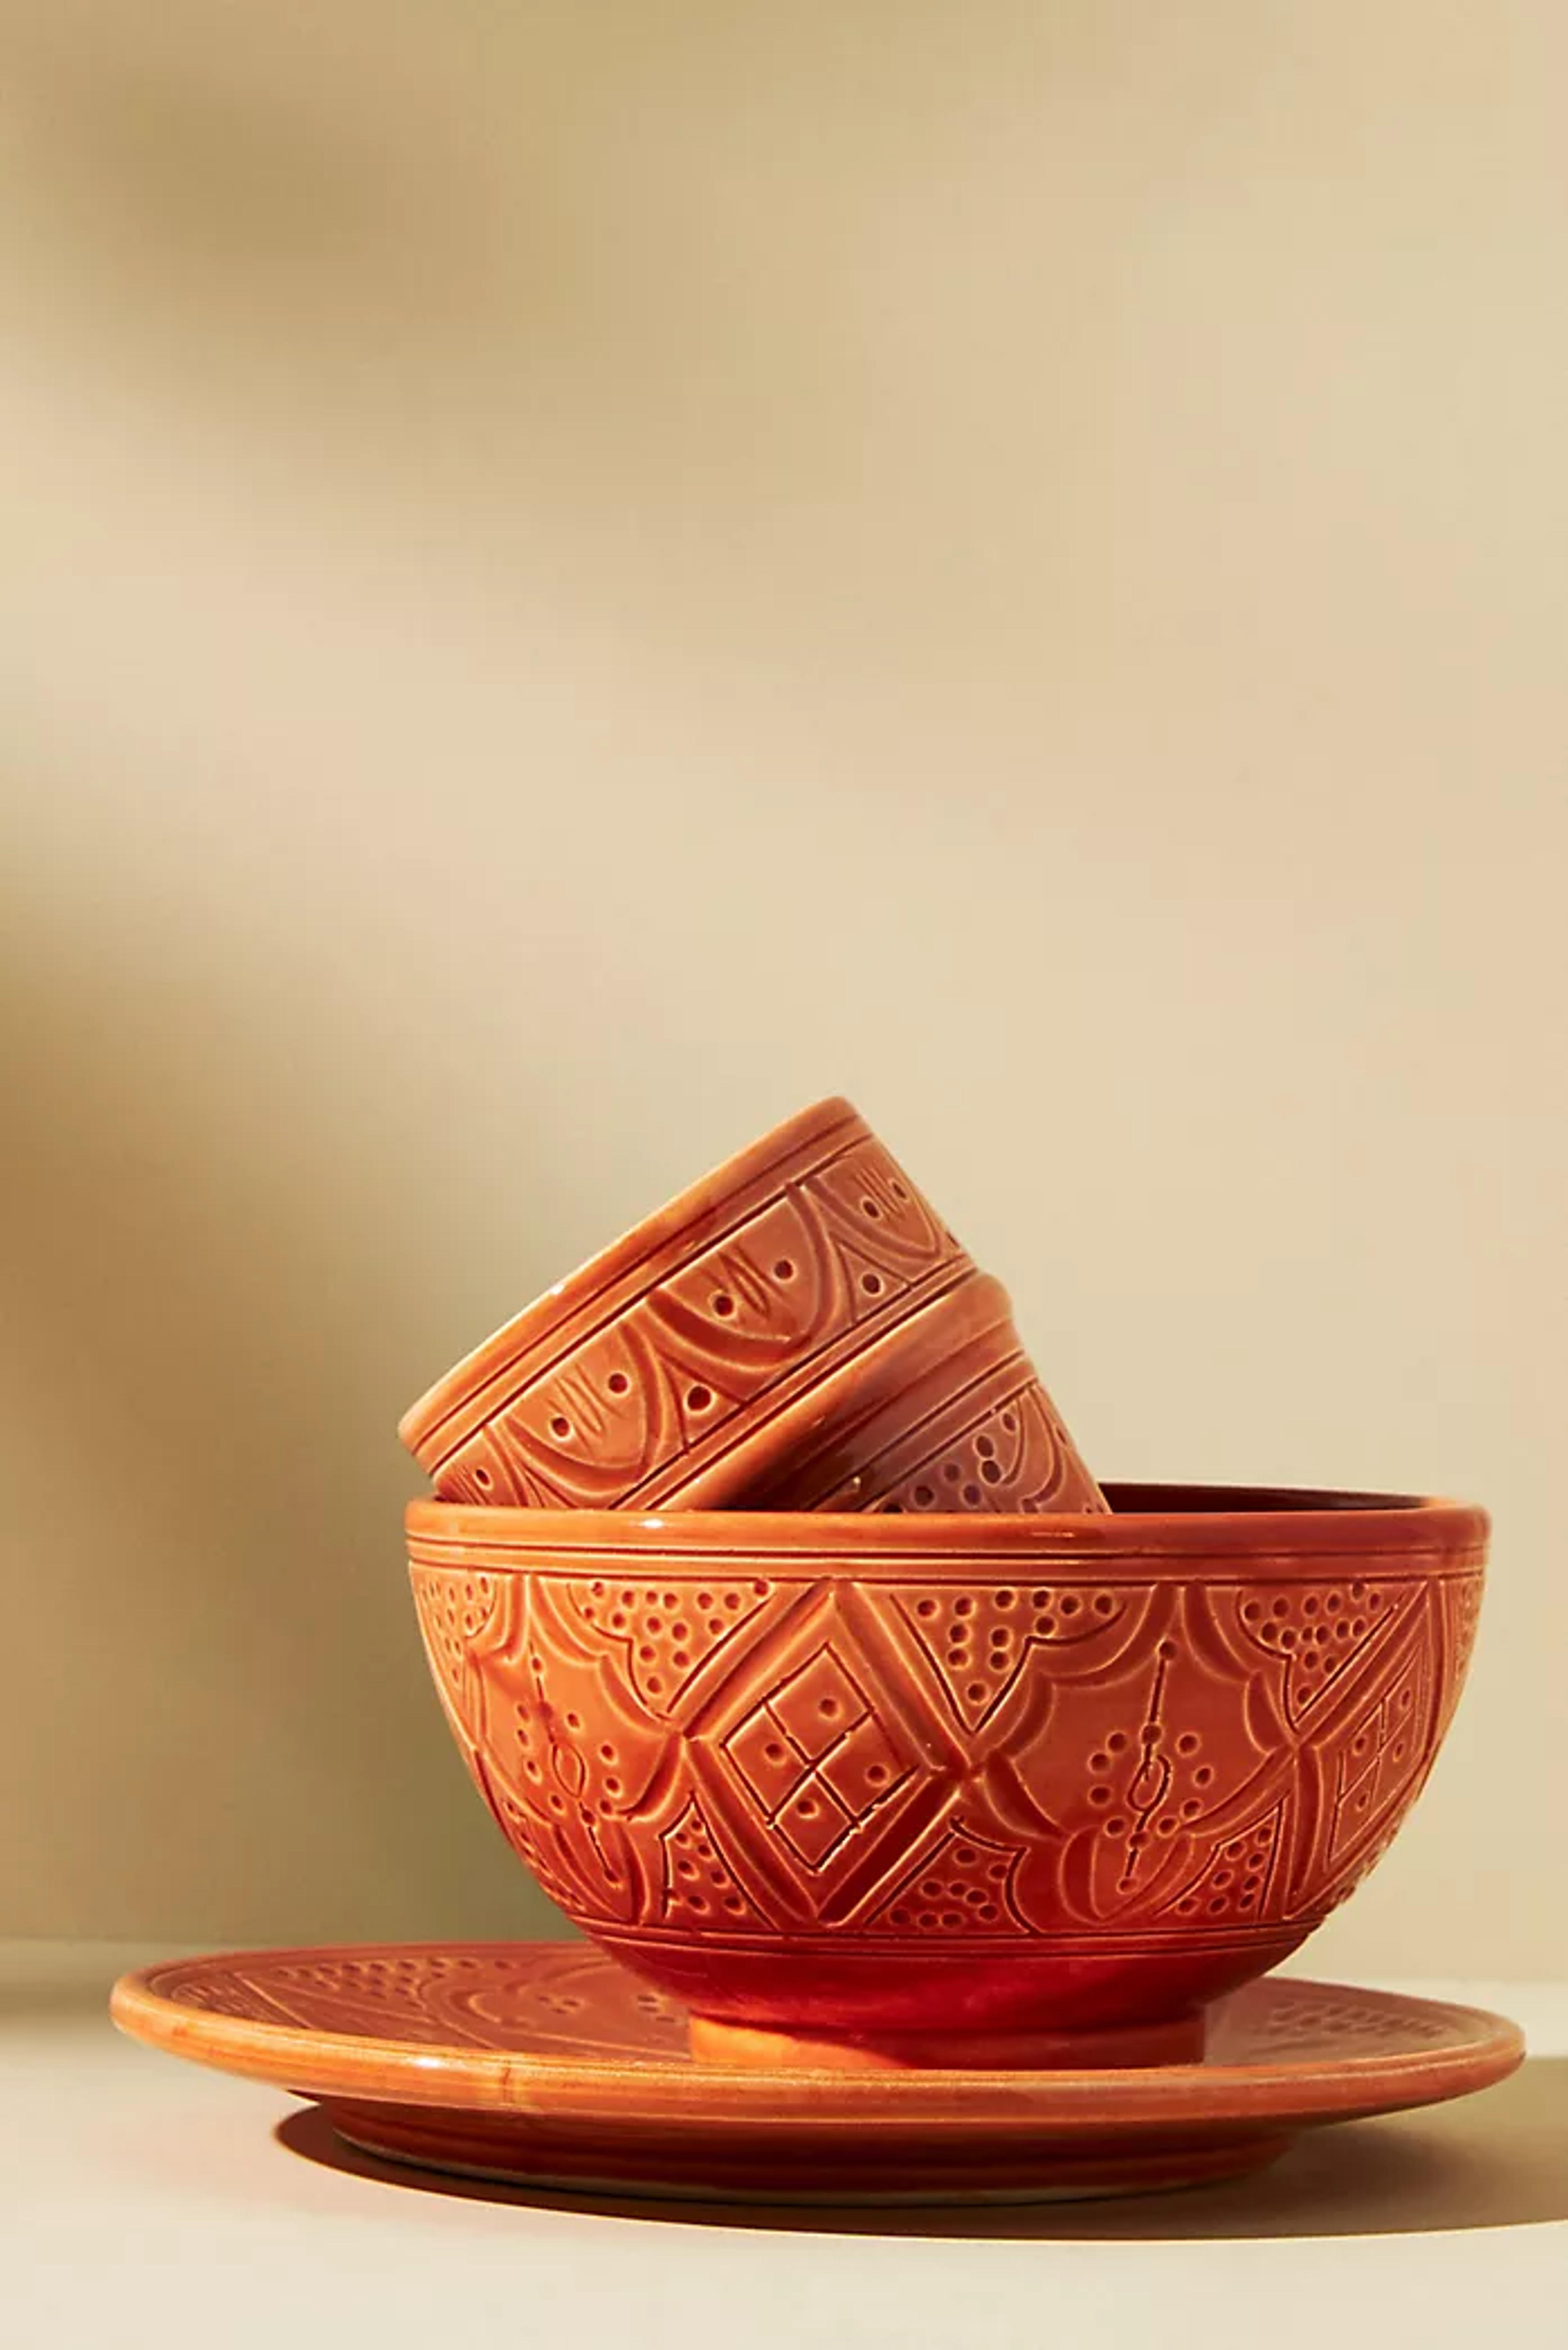 Moroccan Engraved Ceramic Side Plate | Anthropologie